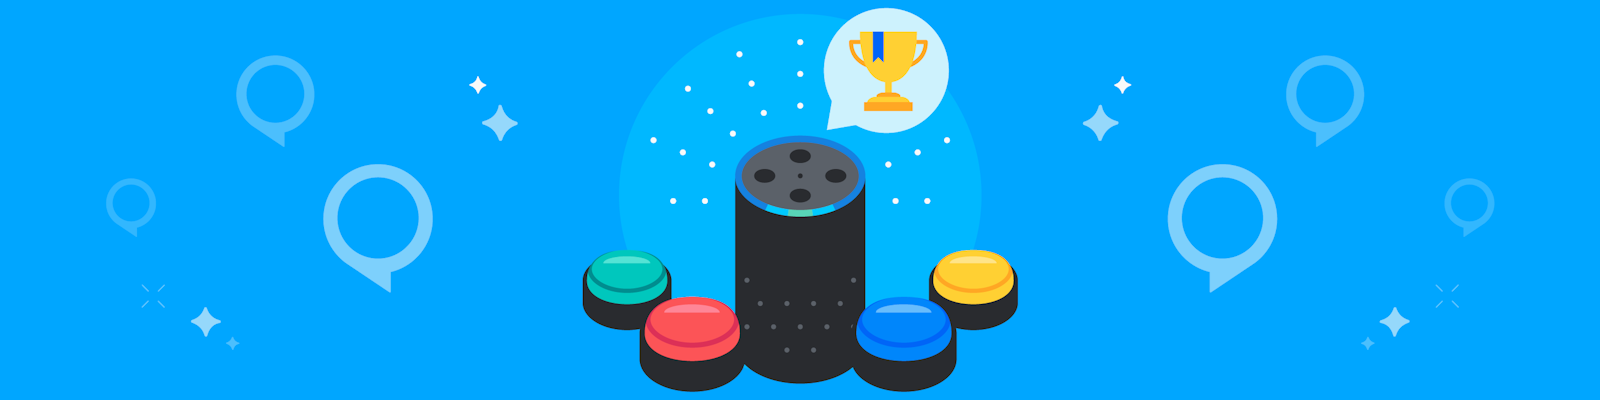 Echo Buttons US Game Skills Contest